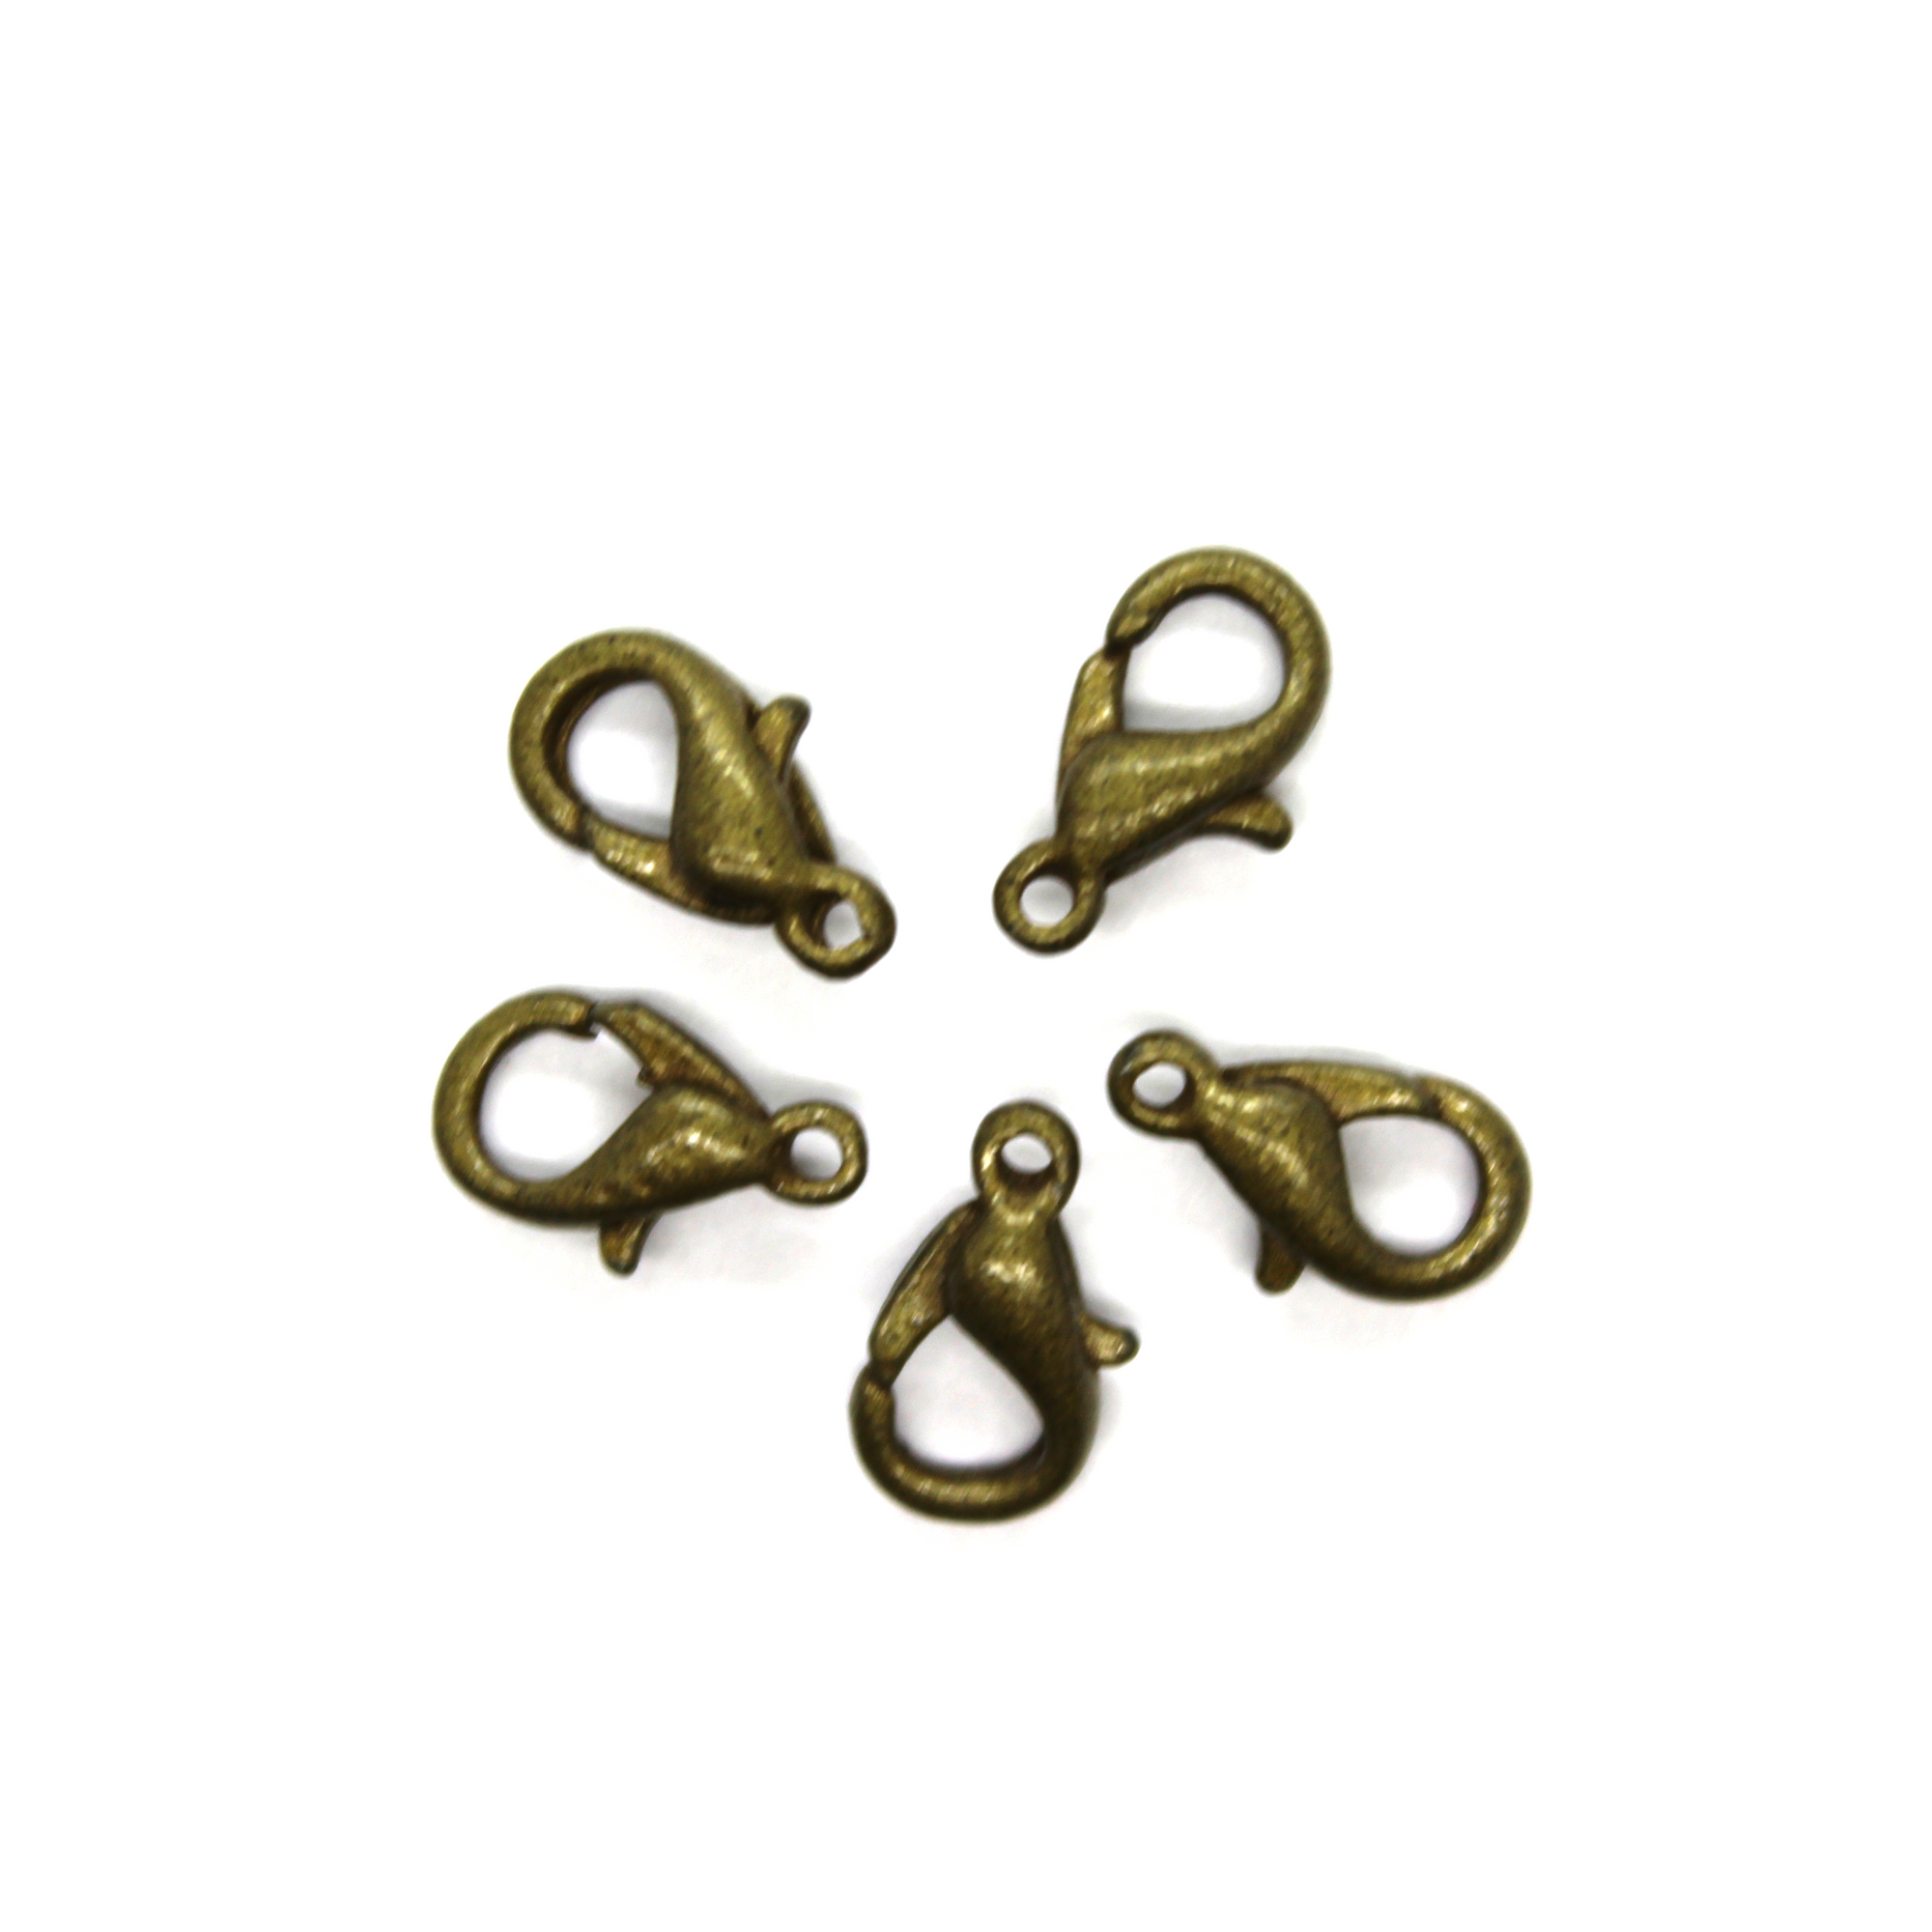 Clasp, Lobster Clasps, Alloy, Brass, 10mm x 6mm, Sold Per pkg of 16